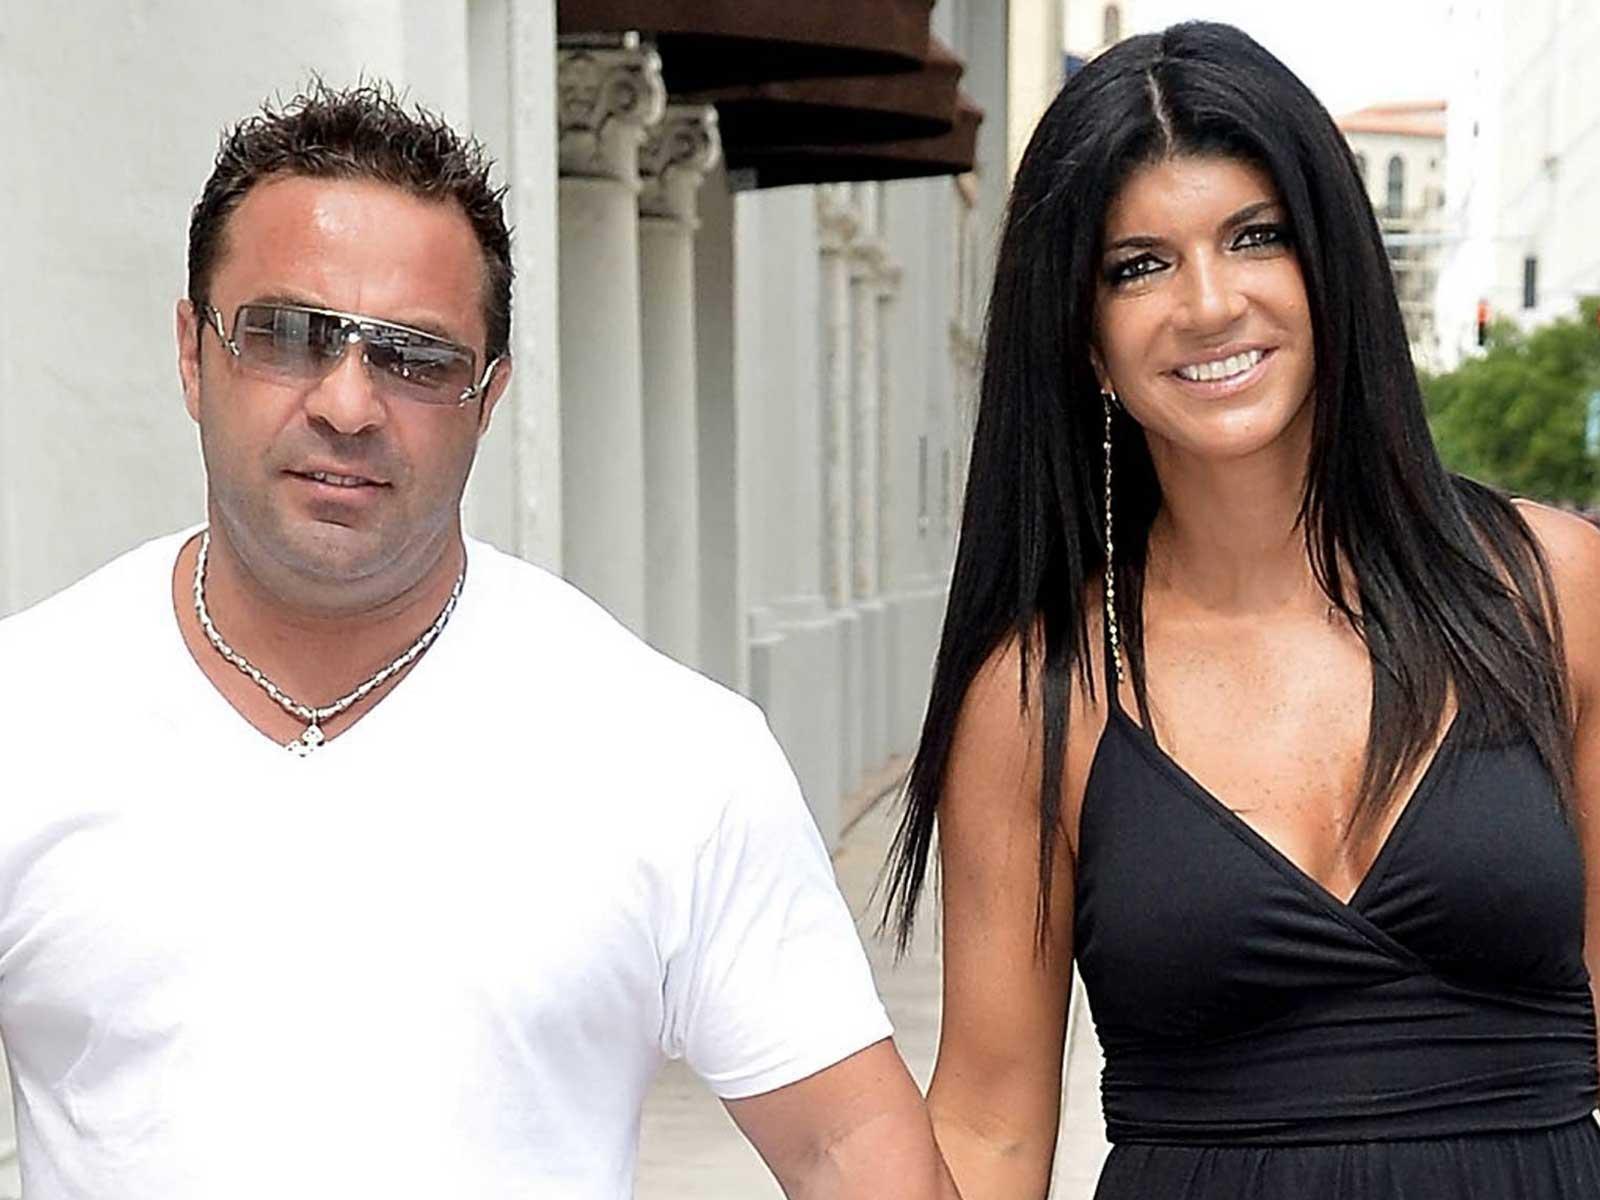 ‘Real Housewives’ Joe Giudice Relocating to New Prison Far Away from Teresa